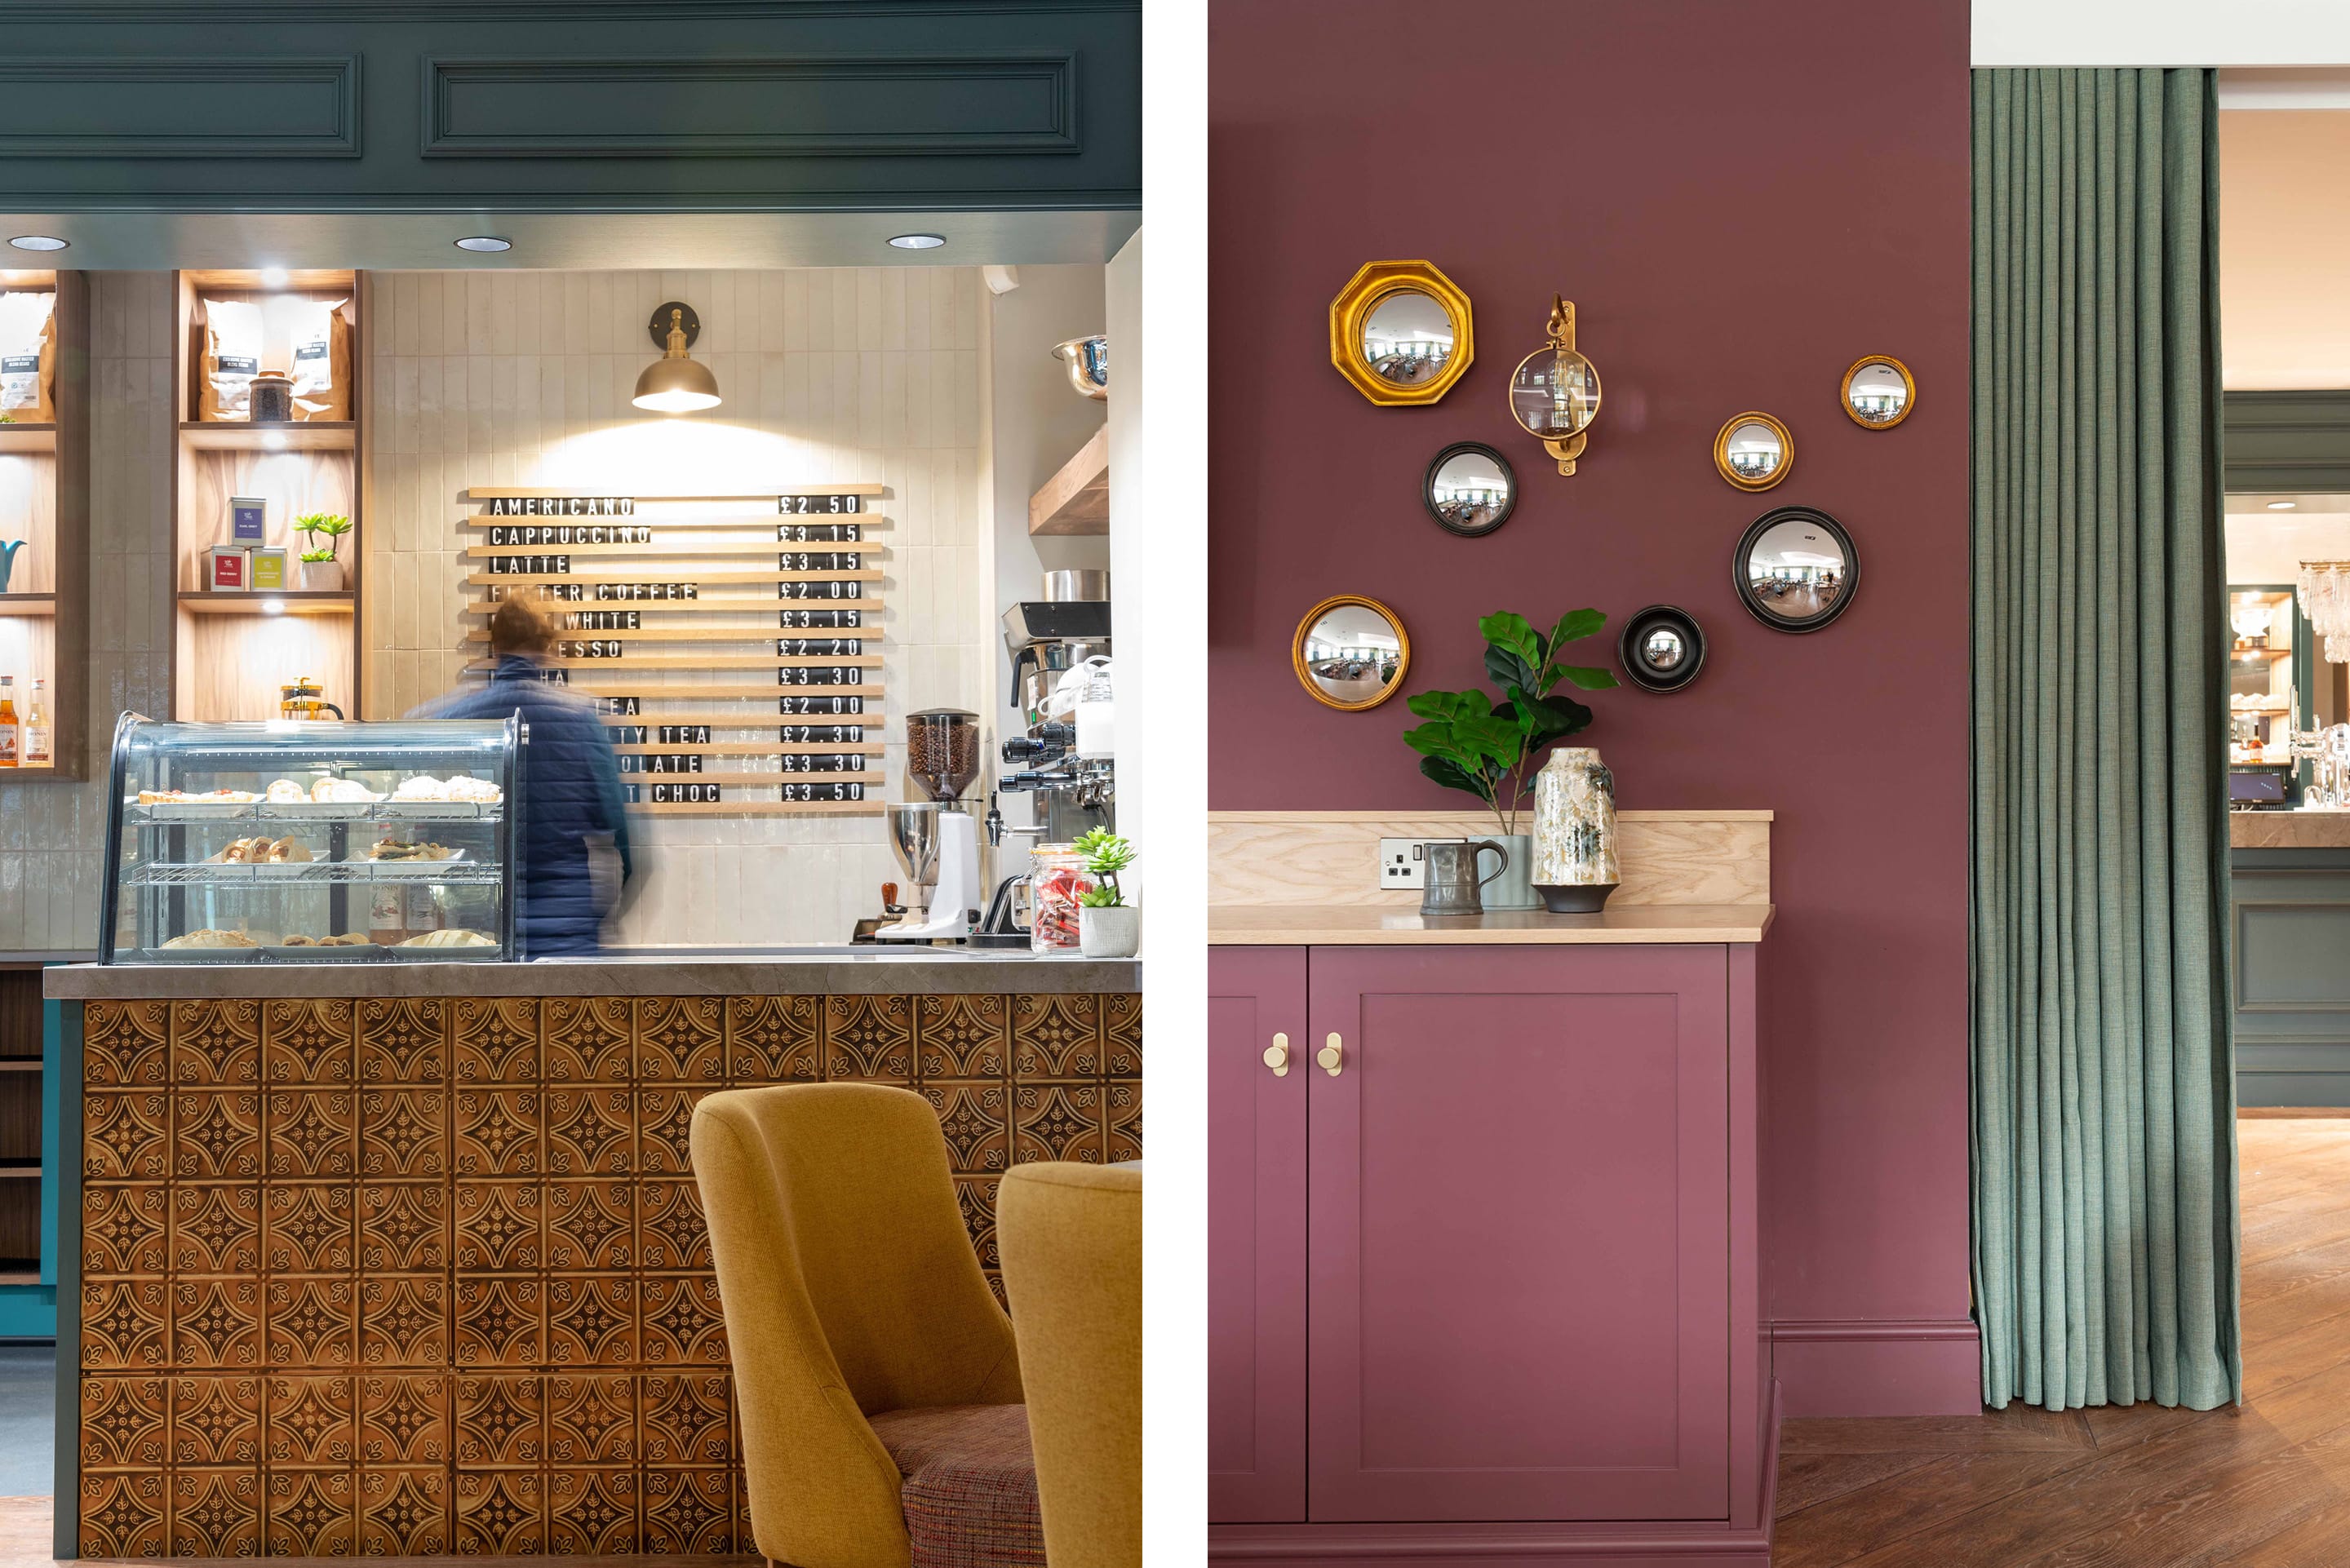 Left hand pictures shows a coffee shop area designed by no 54 interiors with dekton worksurfaces, vertical brick tile walls, and walnut veneer display cabinetry. The right images shows the custom made cabinetry painted in Little Greene's Adventurer 7 - a deep red with oak top and brass handles.